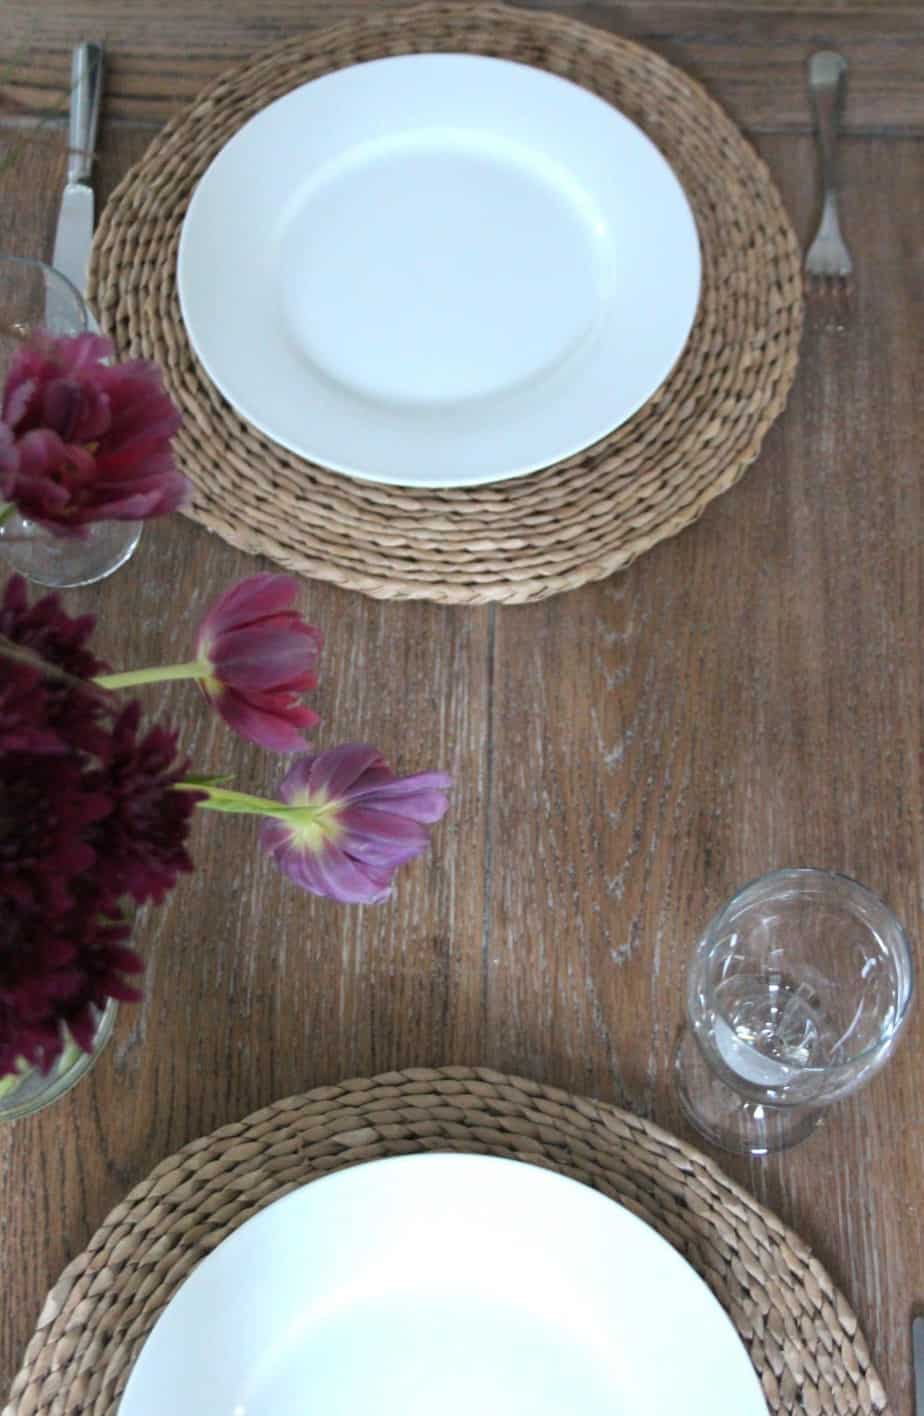 7 Ways to Set a Table With Natural Fiber Placemats - Calypso in